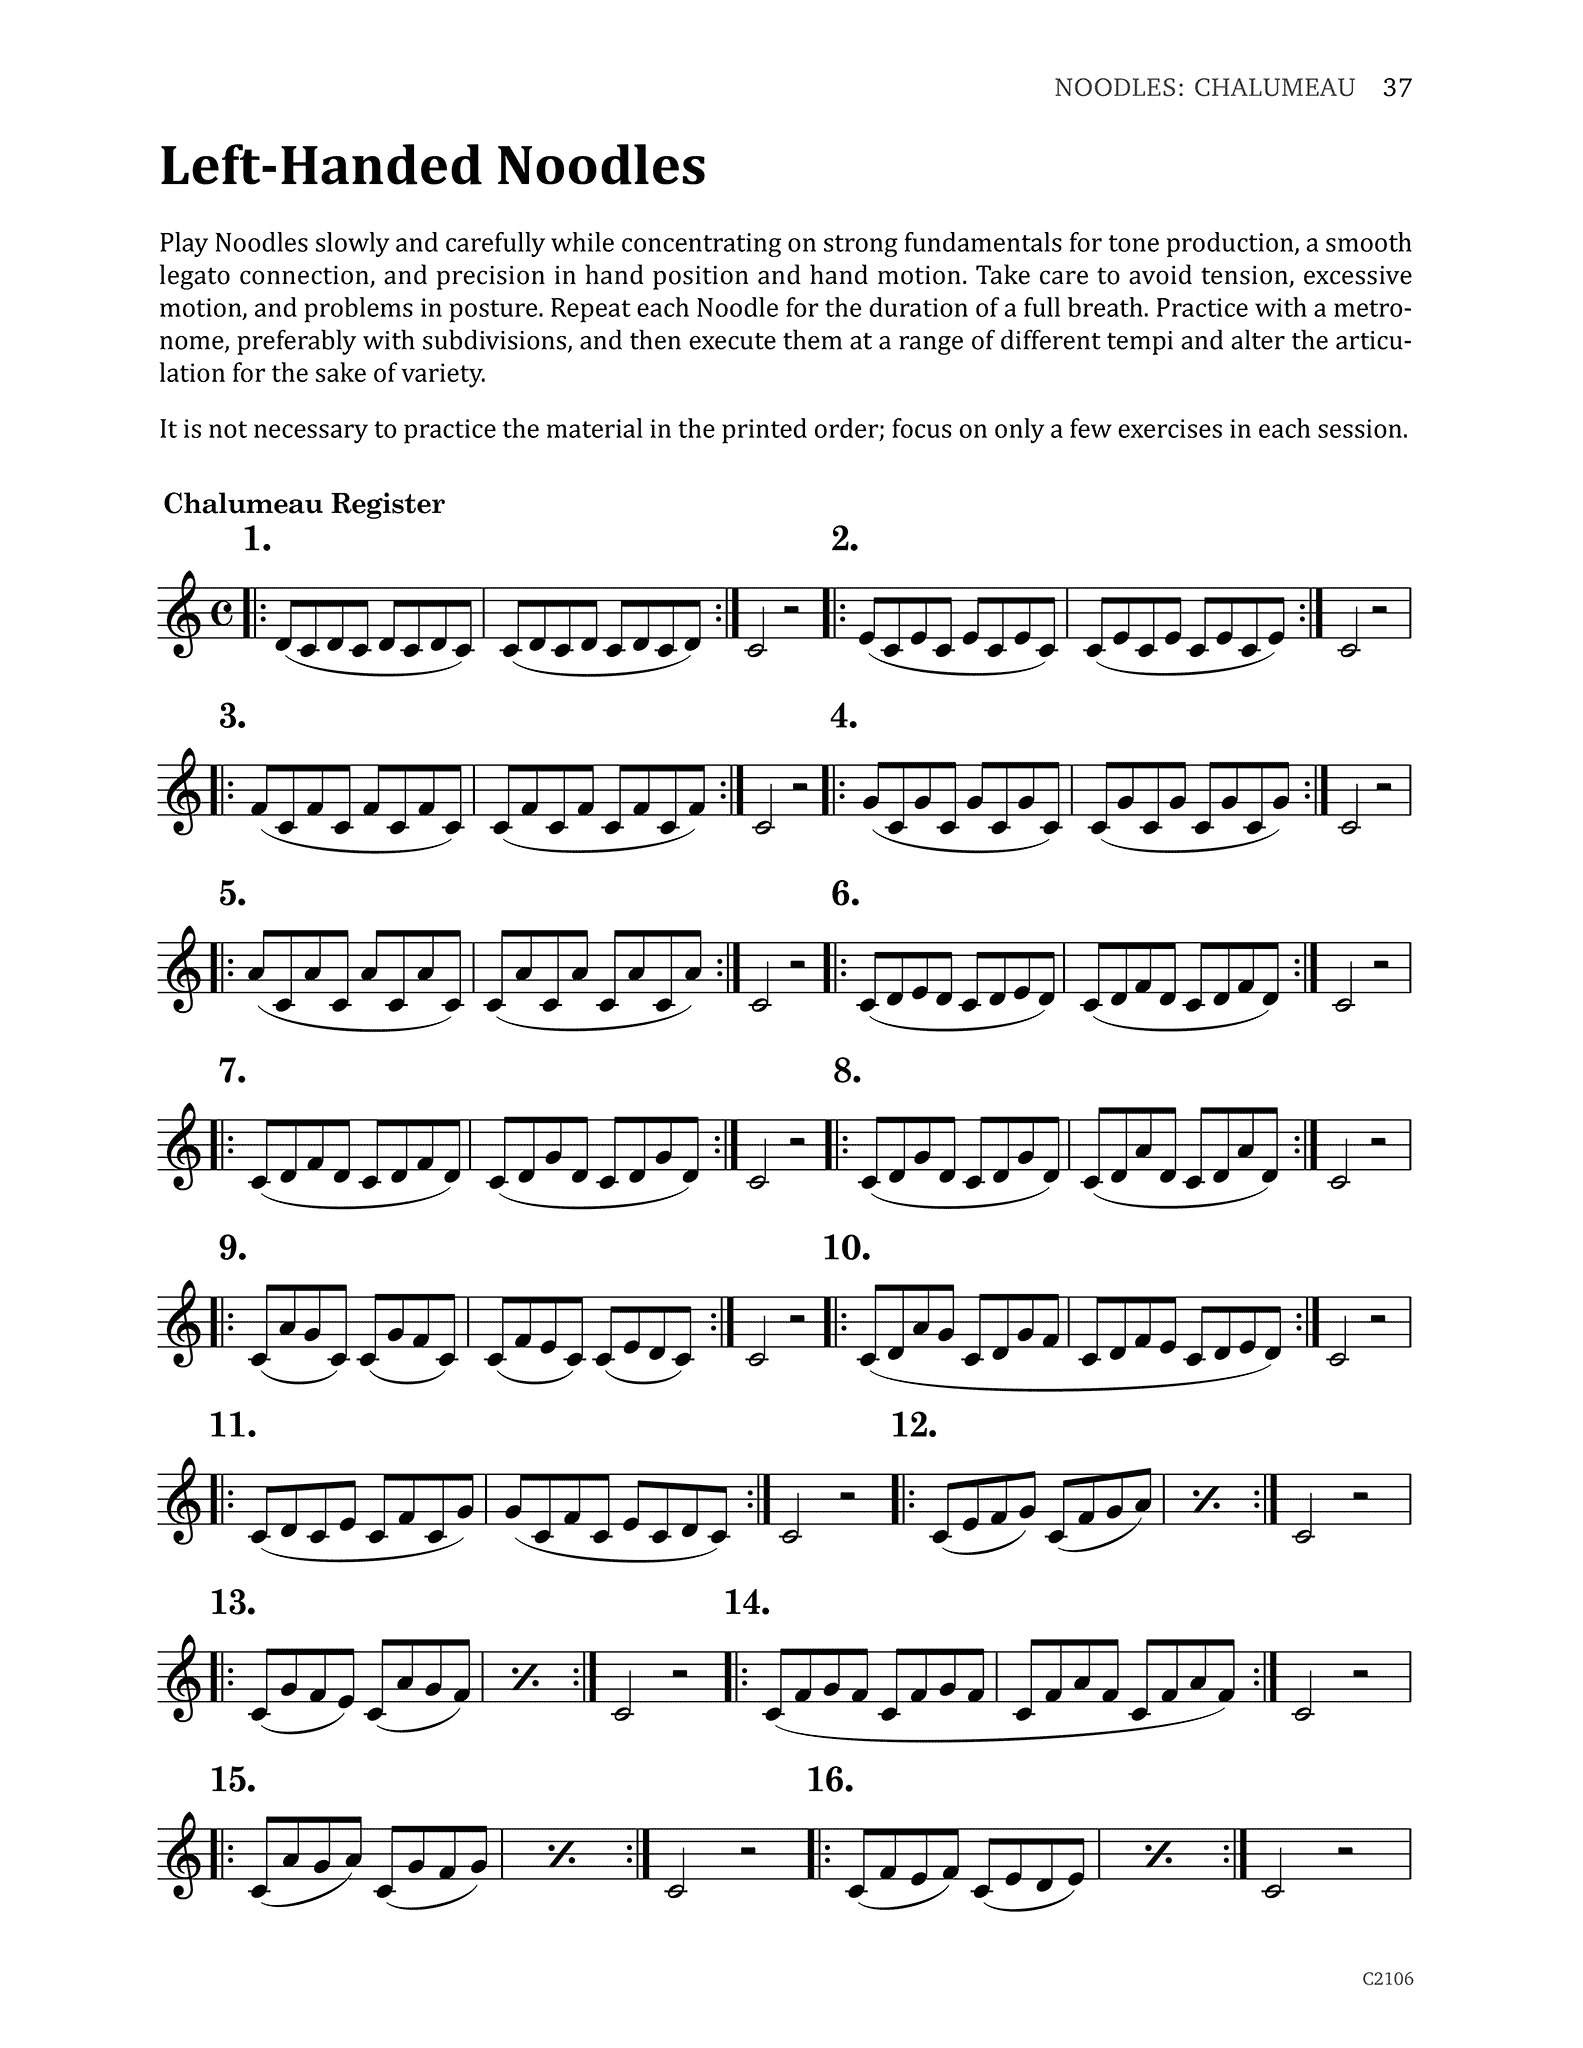 Druhan One Handed Clarinetist’s Workbook page 37 left hand noodles